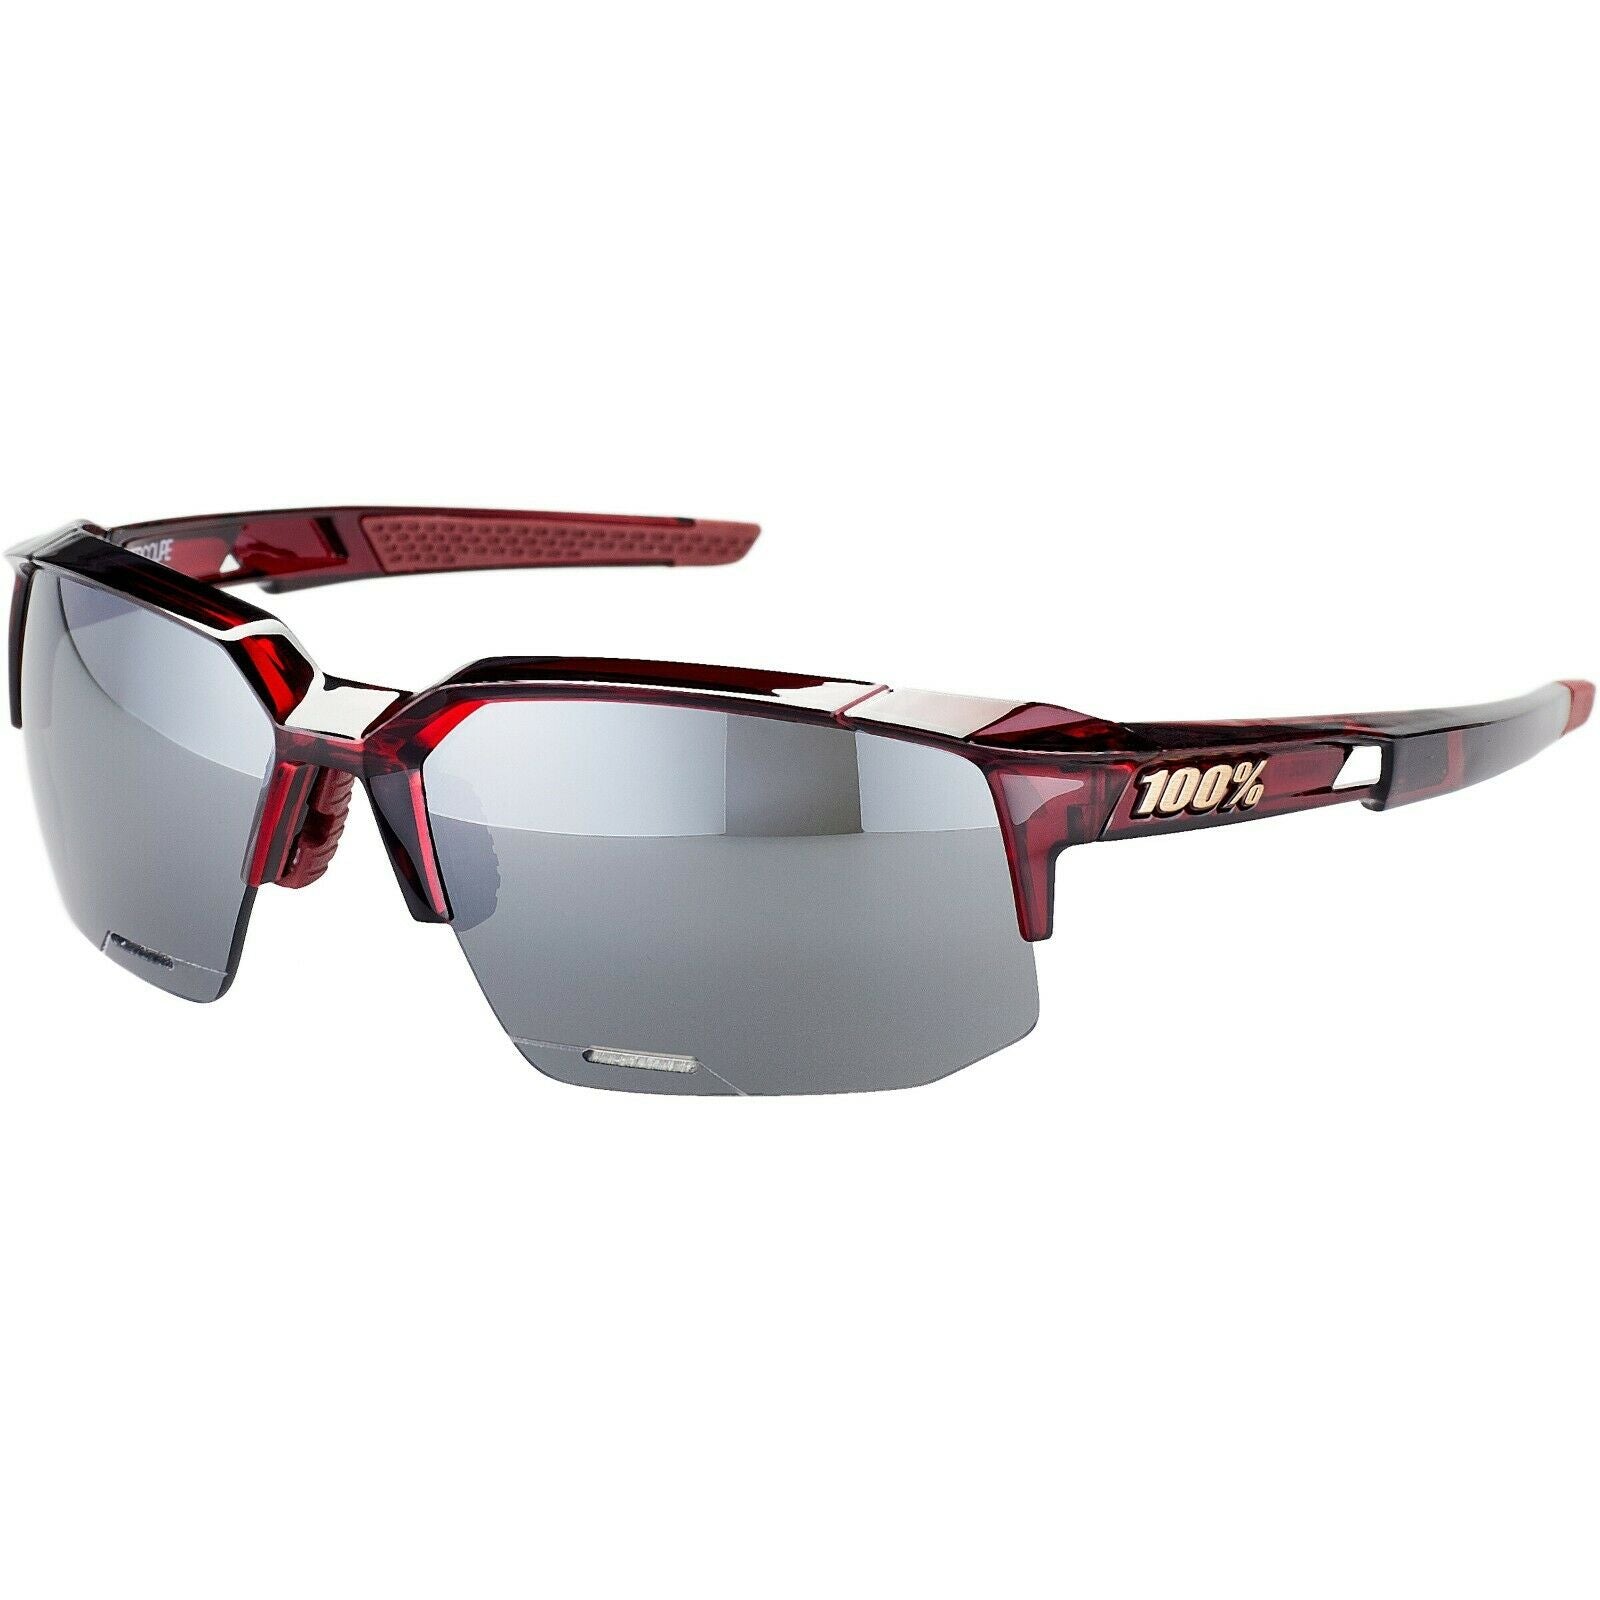 100% Sportcoupe Glasses- Cherry Palace - HiPER Silver Mirror Lens + Clear Lens - Sportandleisure.com (7050874945690)